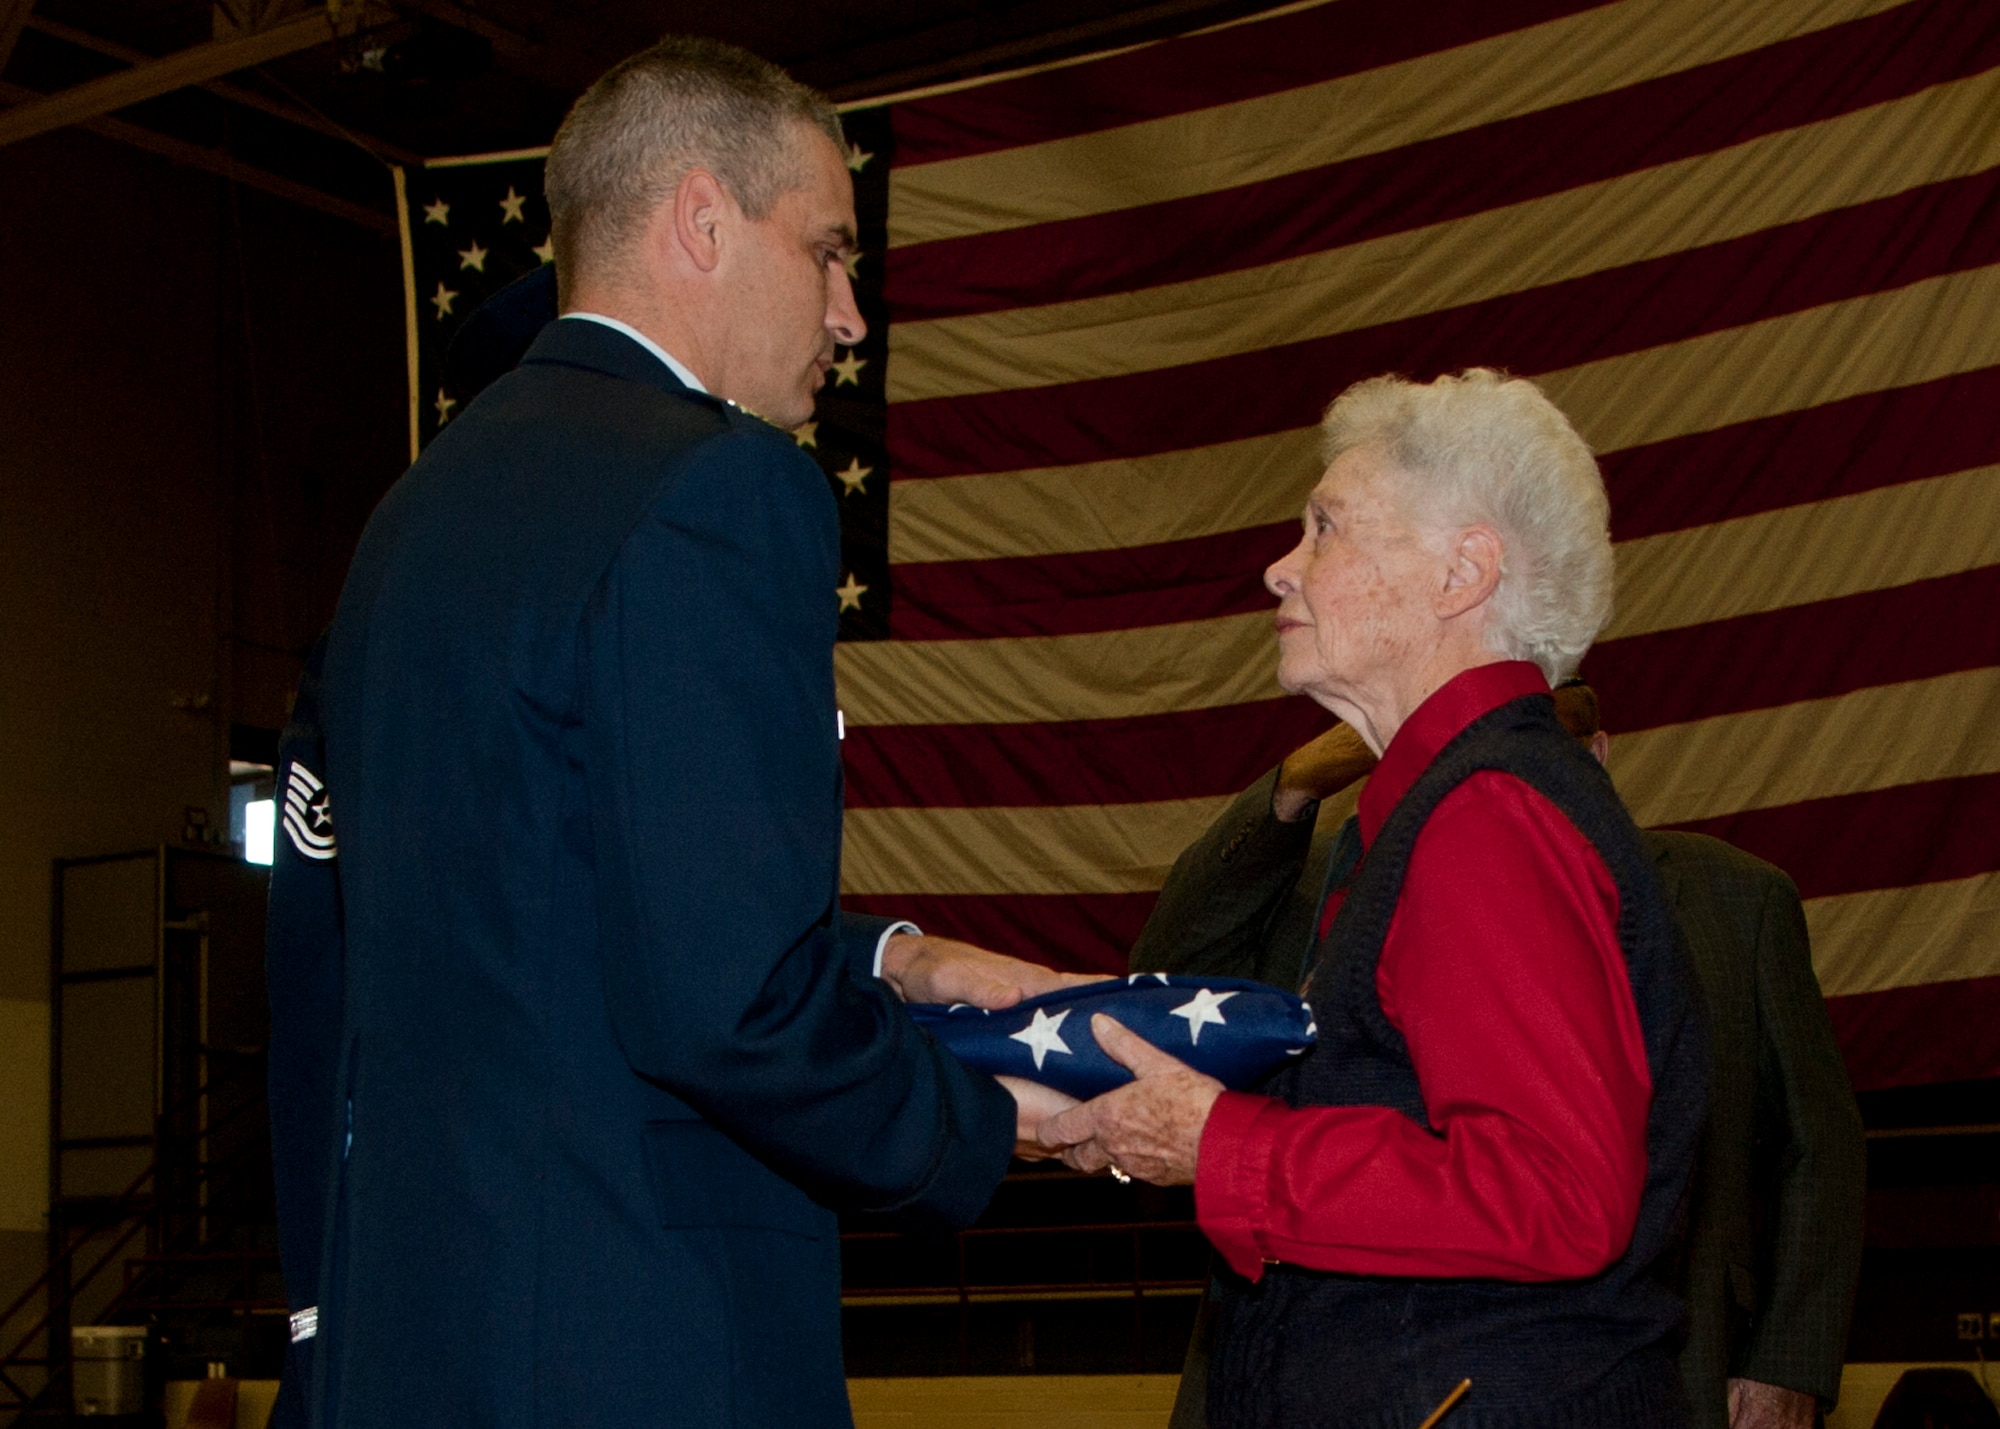 VERNON, Texas – Col. Ted A. Detwiler, 97th Operations Group commander, hands Peggy S. Harris, a World War II widow, an American flag during a Vernon High School assembly held to honor U.S. military veterans, Nov. 12, 2012. Peggy’s husband, 1st Lt. Billie D. Harris, was flying a mission over Nazi-occupied France when his plane was shot down and crashed into the woods near a small town in Normandy. He never returned home. Peggy was on a 60-year journey to find answers to her husband’s whereabouts. (U.S. Air Force photo by Airman 1st Class Klynne Pearl Serrano / Released)